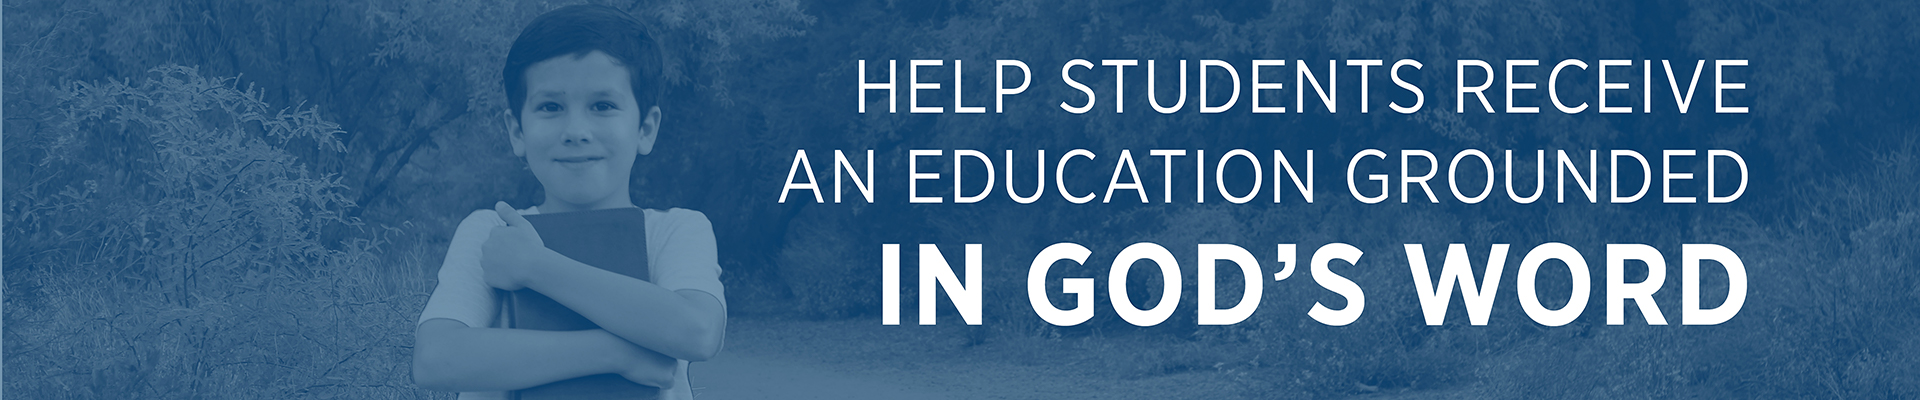 Help students receive an education grounded in God's Word